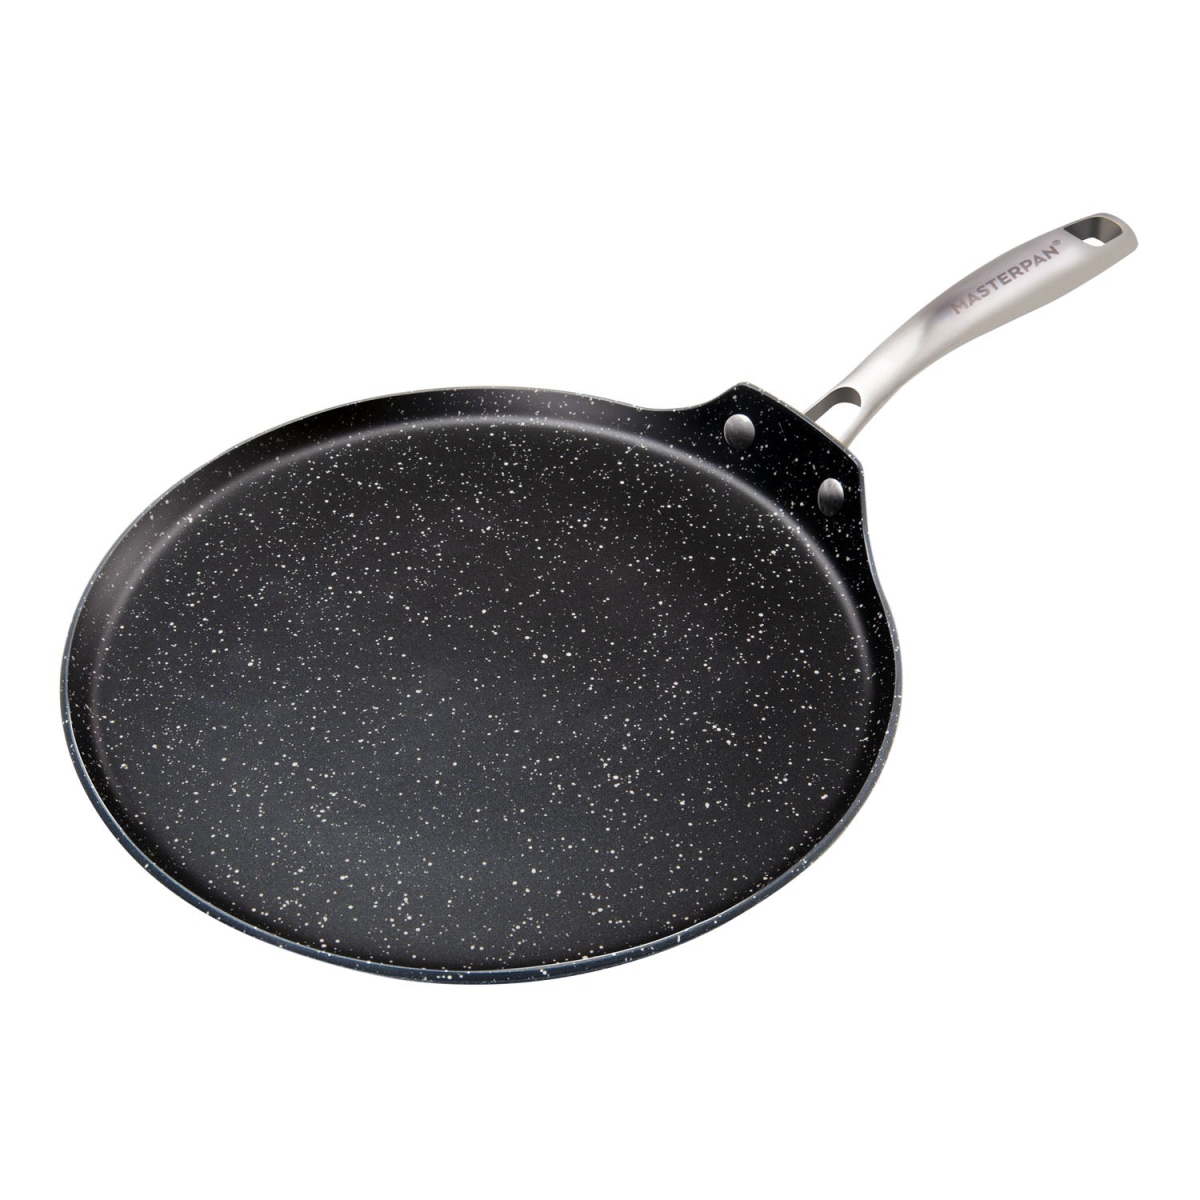 Picture of Masterpan MP-128 11 in. Crepe Pan & Non-Stick Aluminium Cookware with Stainless Steel Riveted Handle